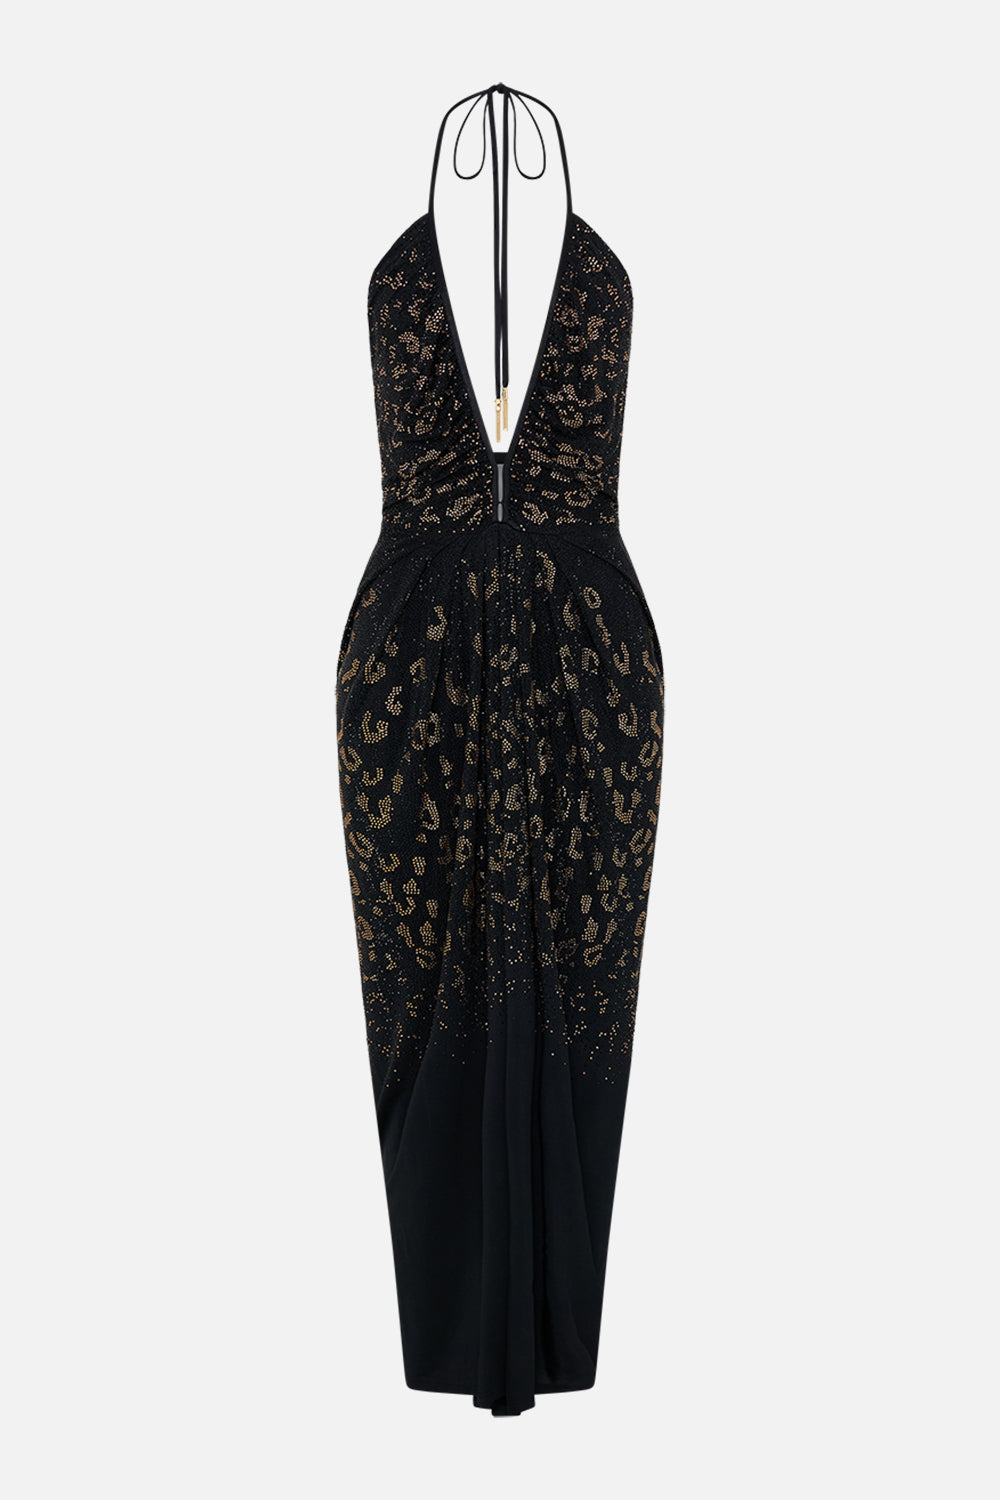 Product view of CAMILLA black jersey dress in Mosaic Muse  